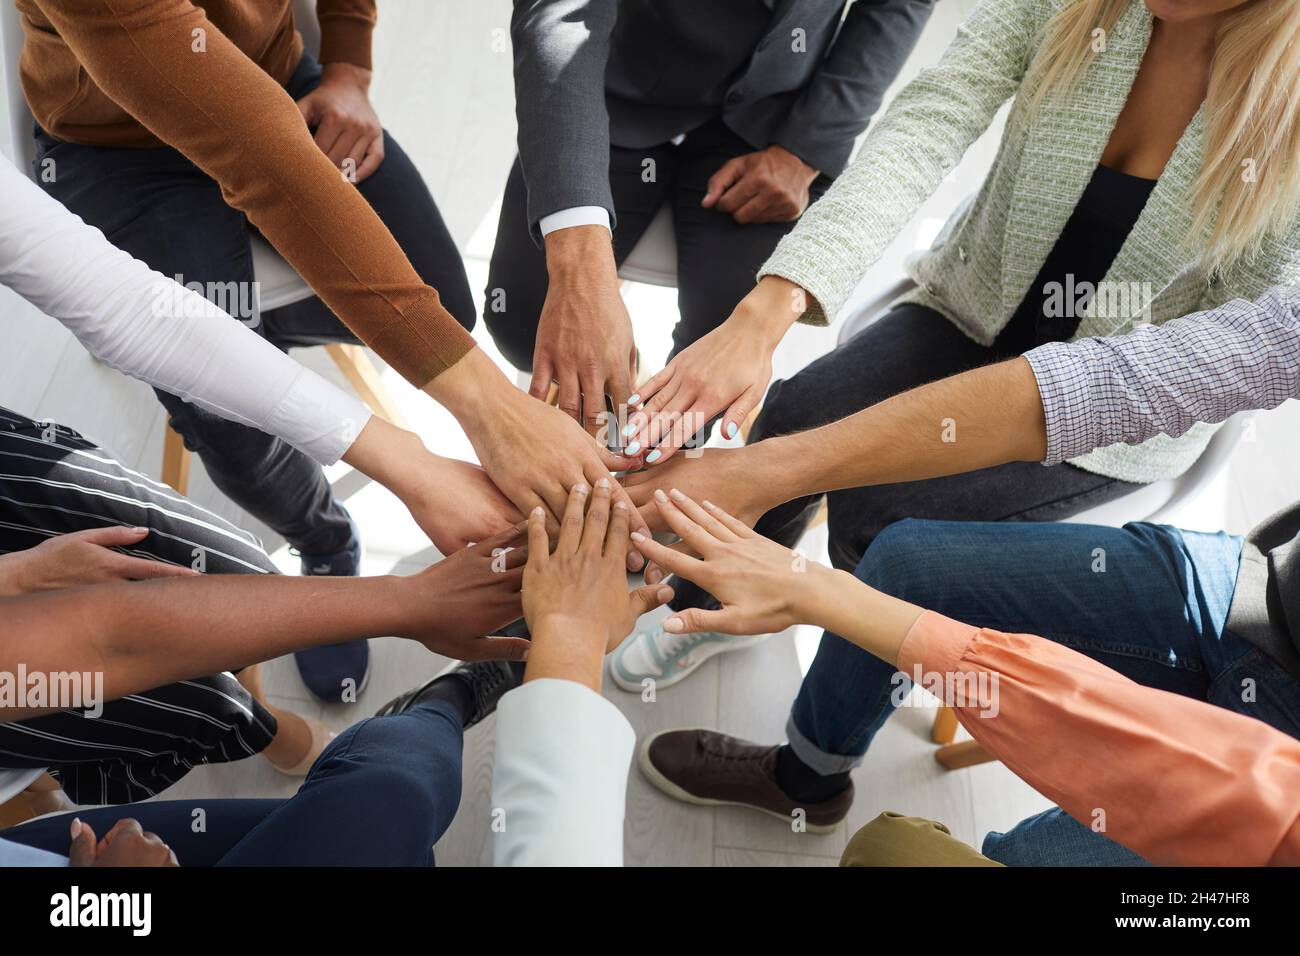 Young motivated people fold their hands on each other symbolizing their unity and support. Stock Photo